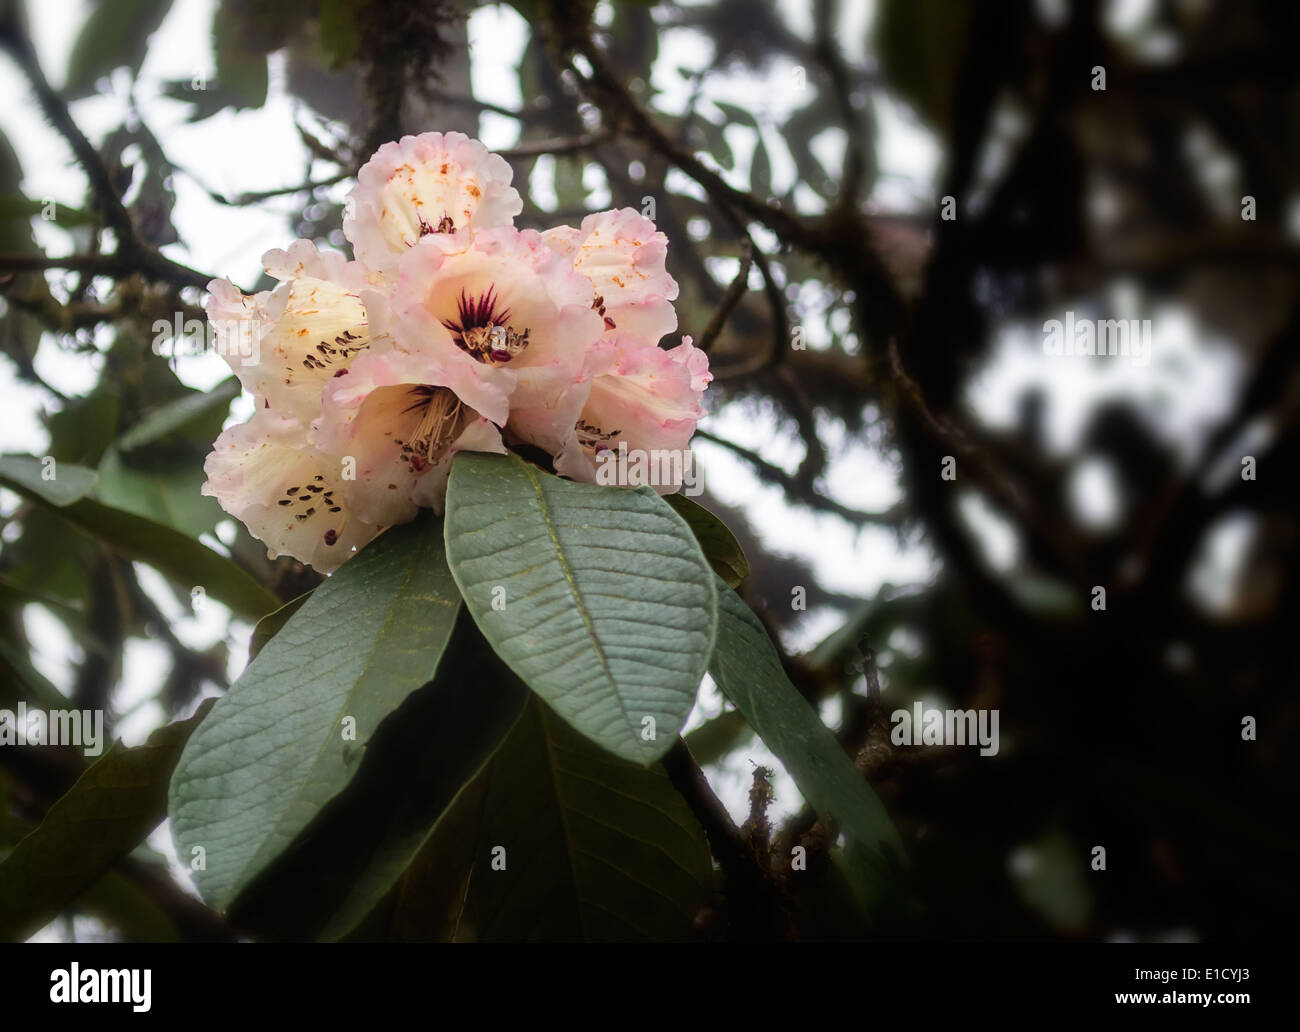 Rhododendron flower blooming in Himalayan forest of Singalila National Park Stock Photo